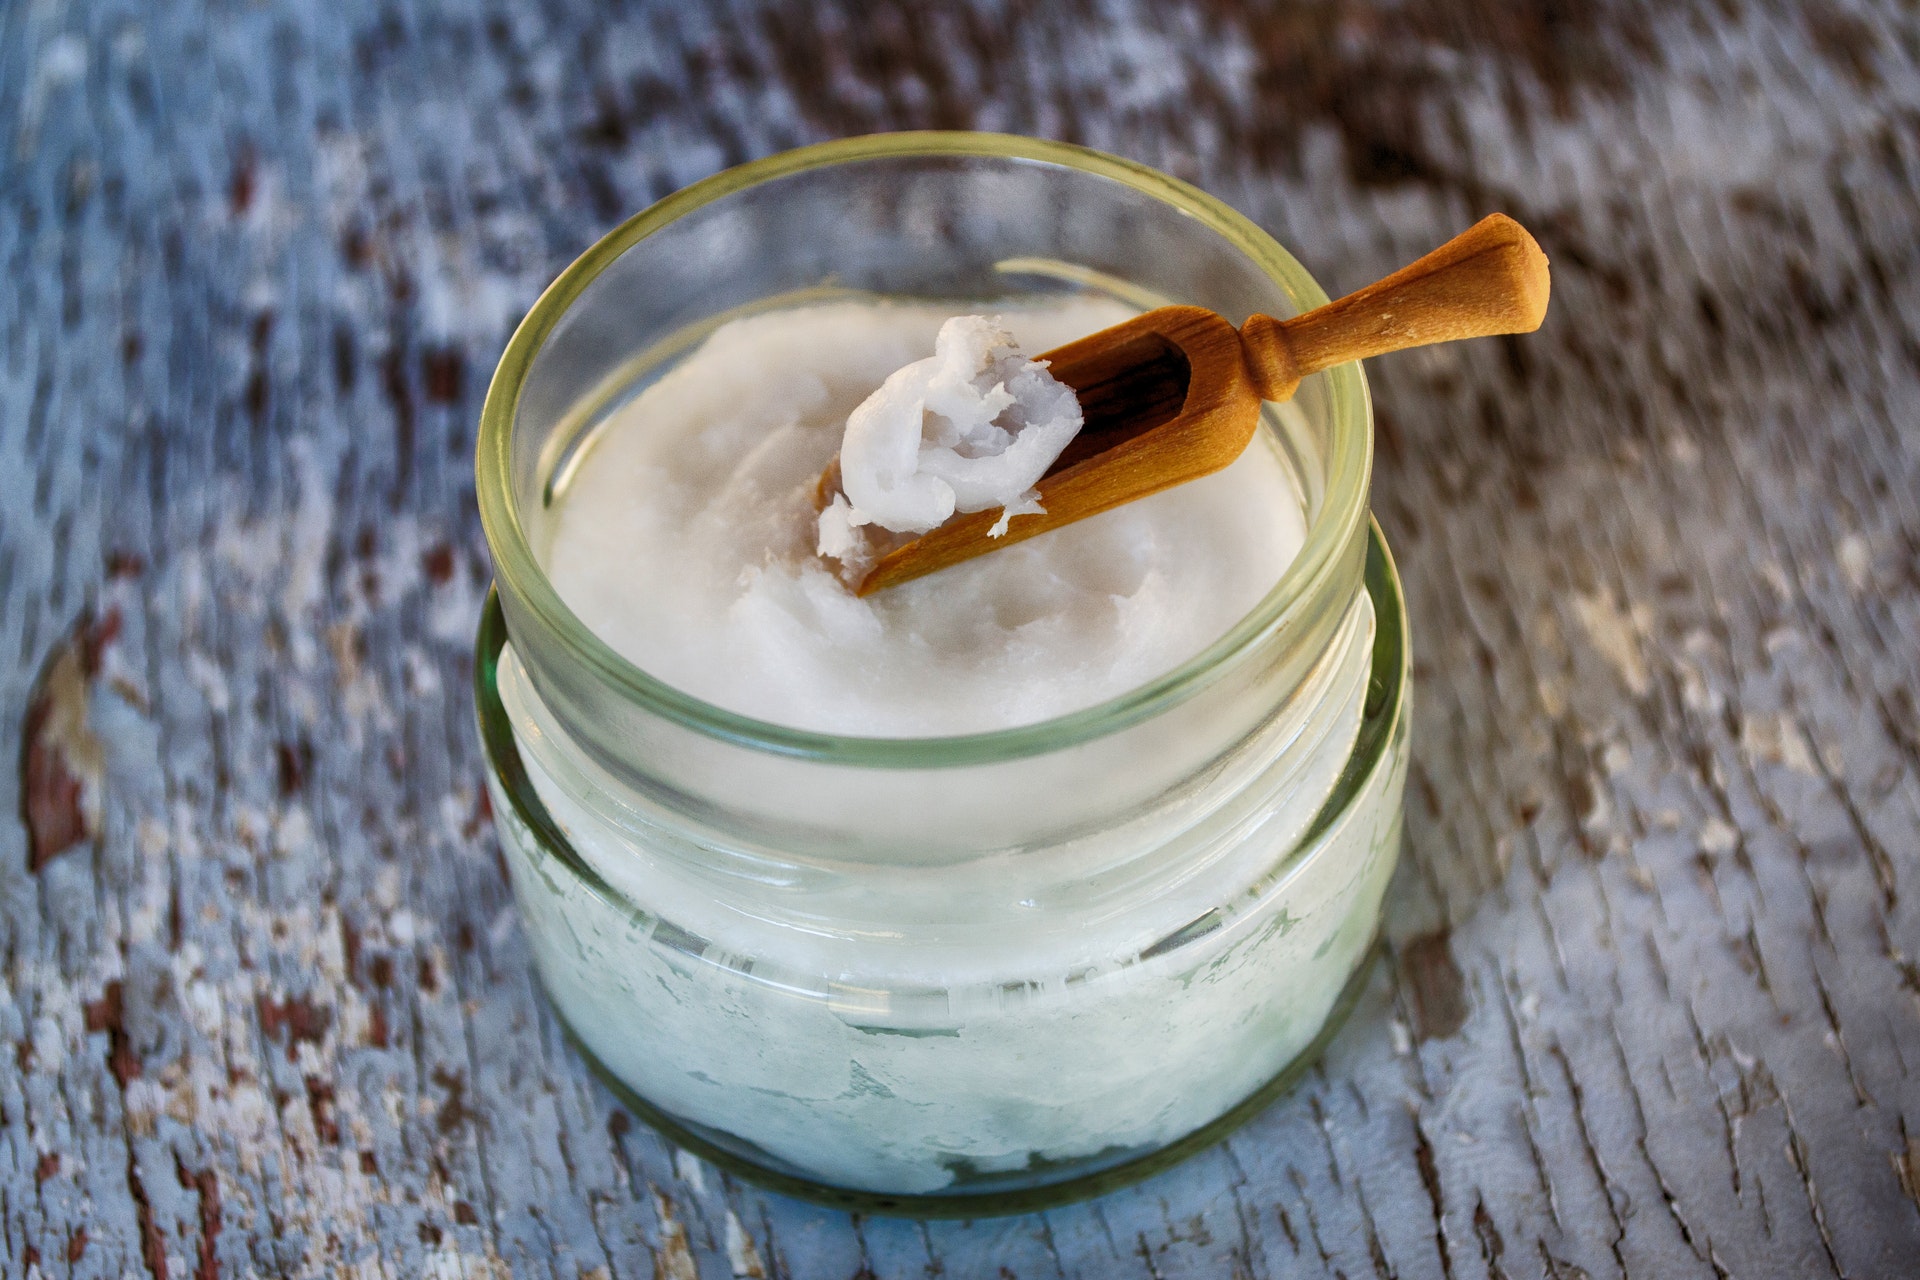 coconut oil will revolutionize your household